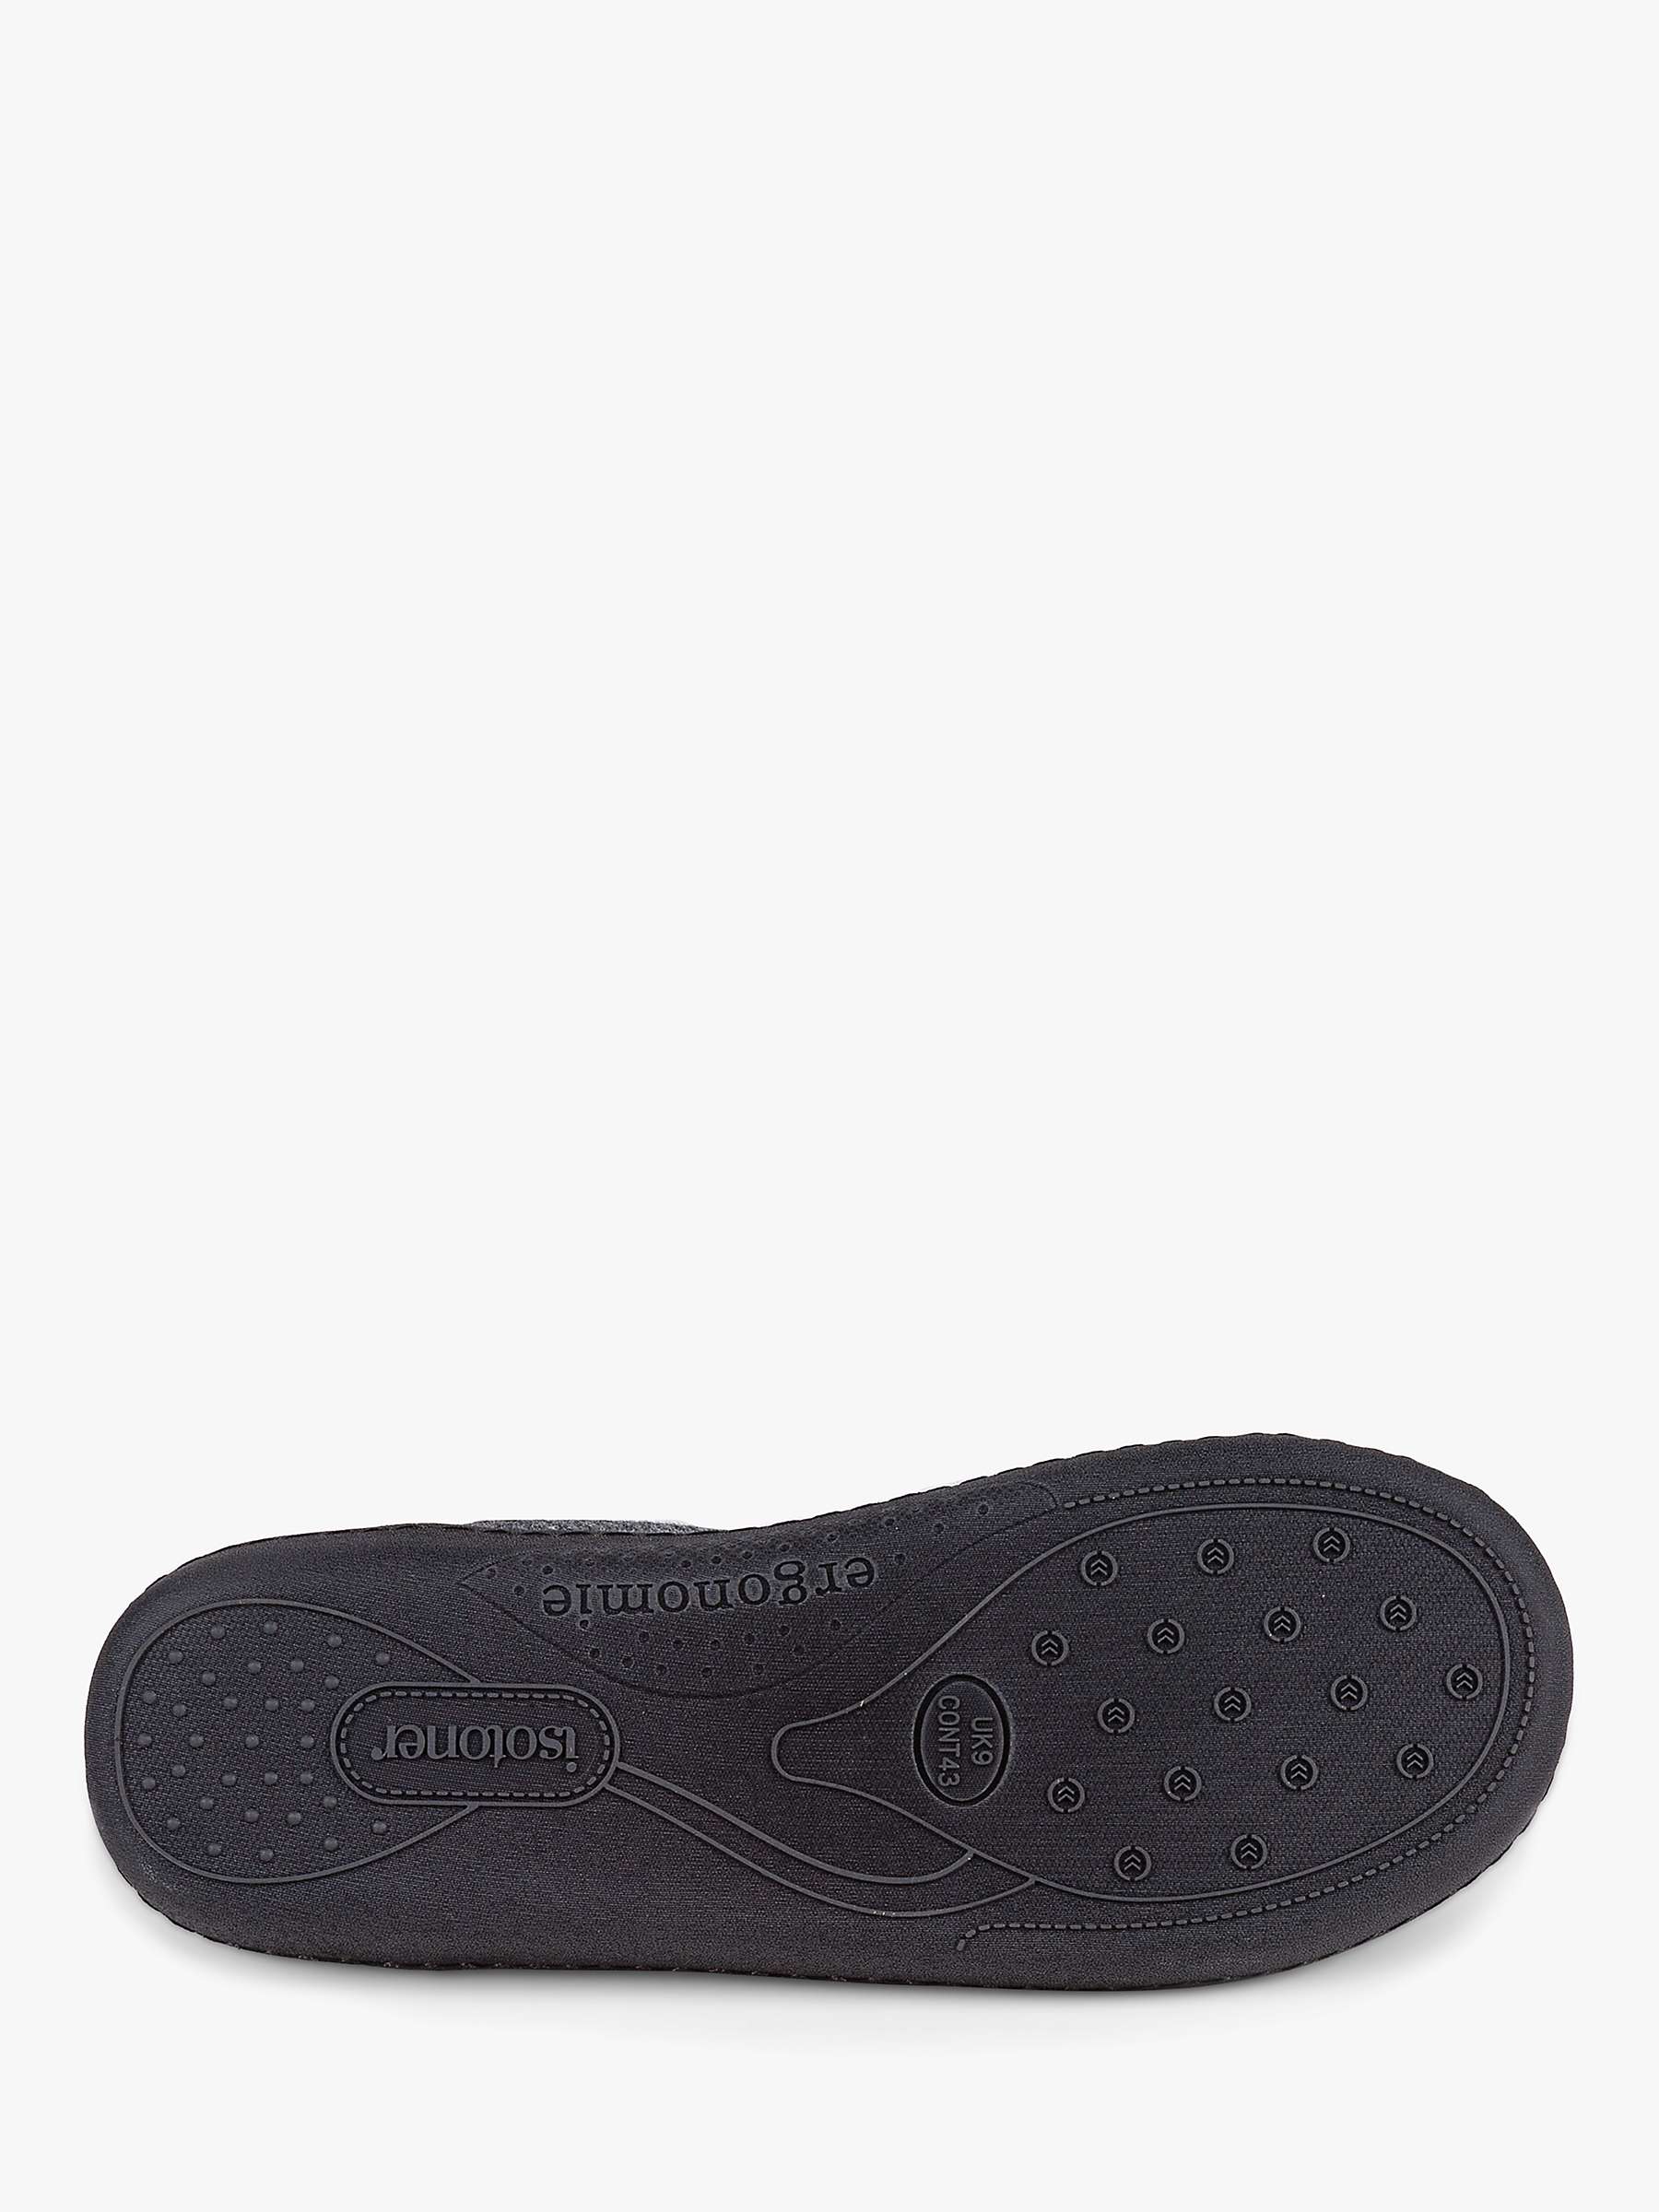 Buy totes Waffle Mule Slippers Online at johnlewis.com